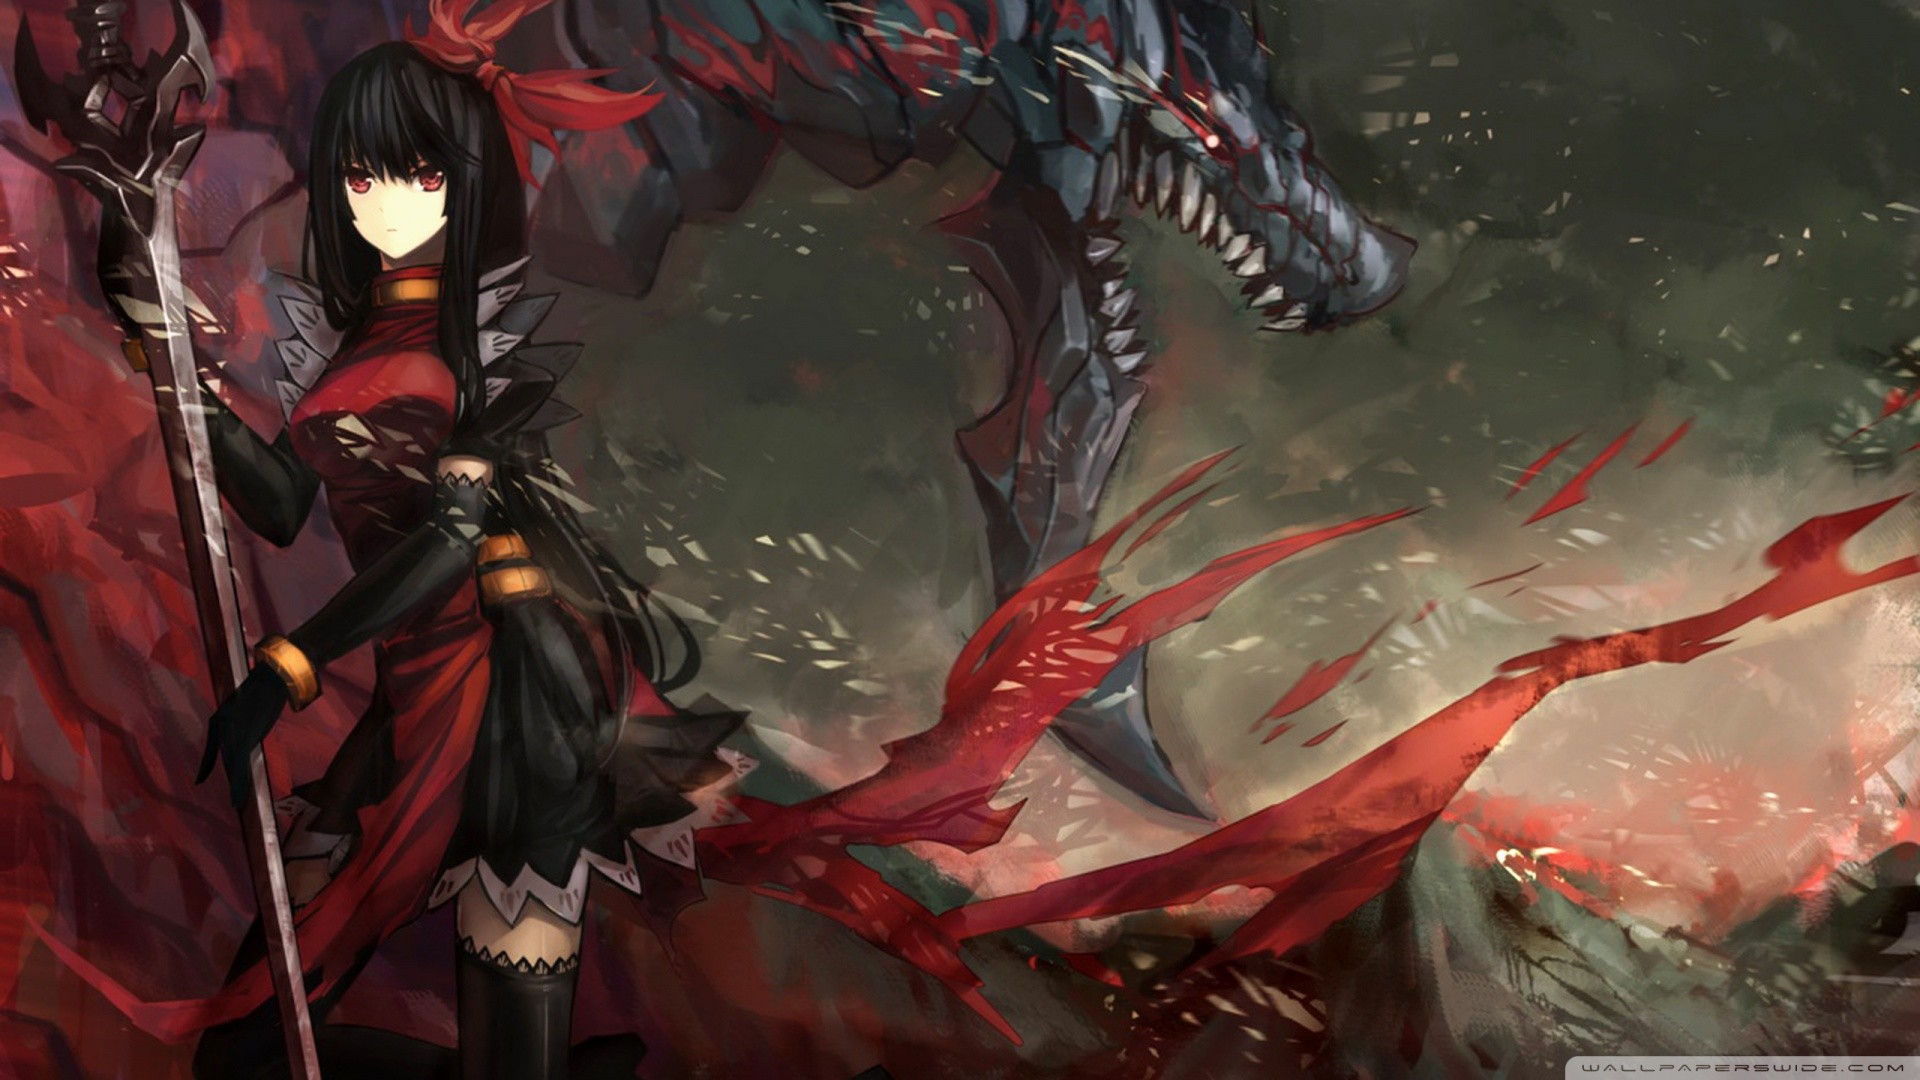 1920x1080 Girl And Dragon wallpapers (21 Wallpapers) – HD Wallpapers ...